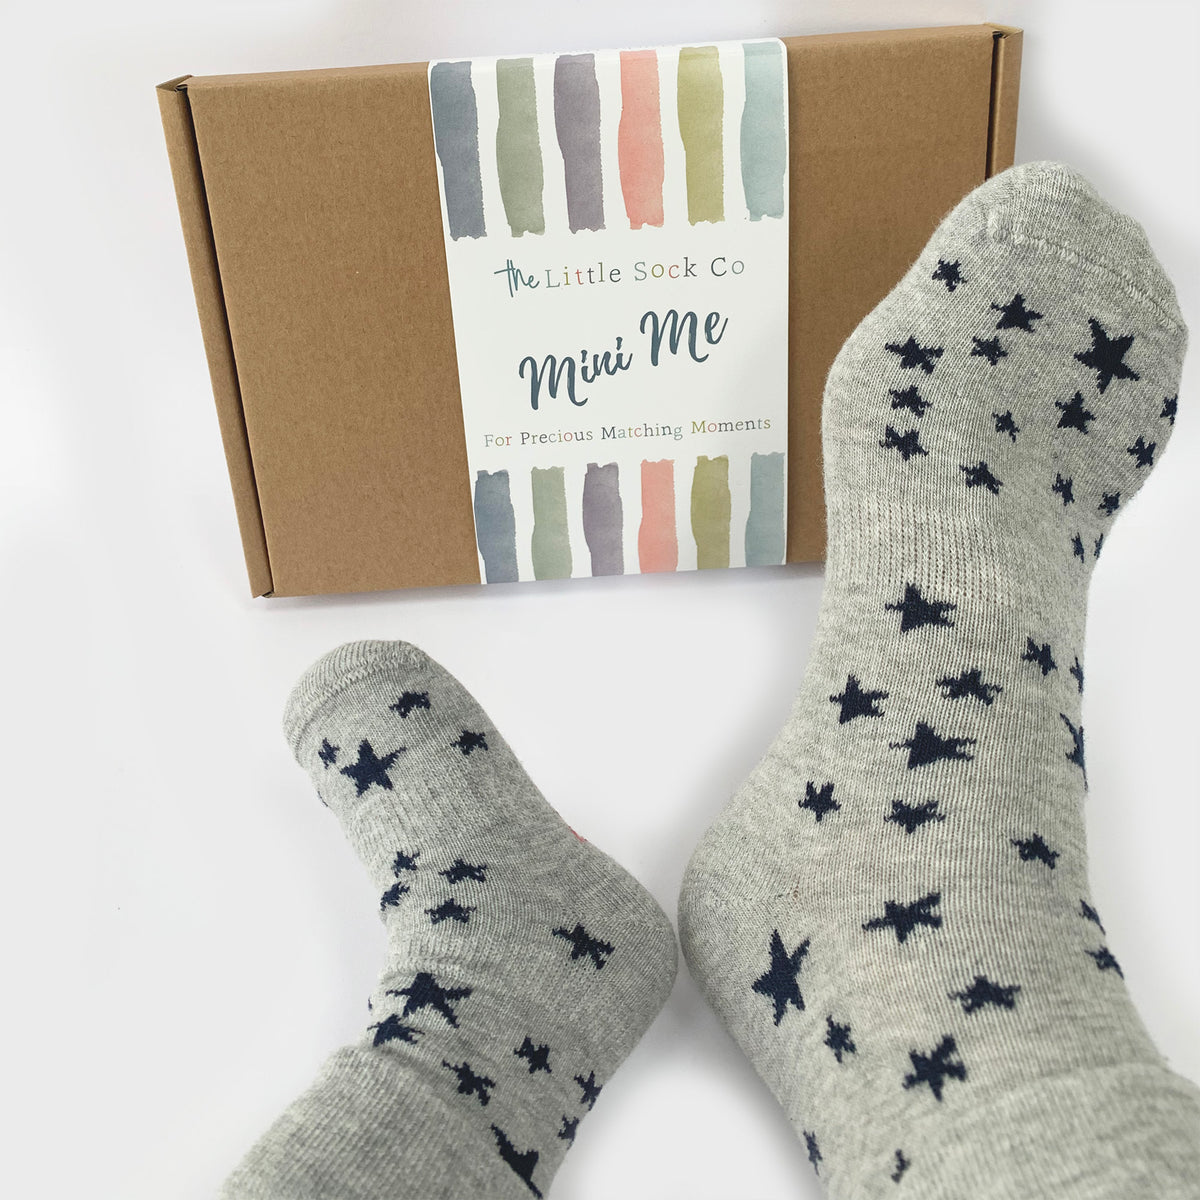 Mini Me Matching Adult and Child Family Socks Gift Set in Stars ⭐️ - The Perfect Gift for Birthdays or Mother's Day